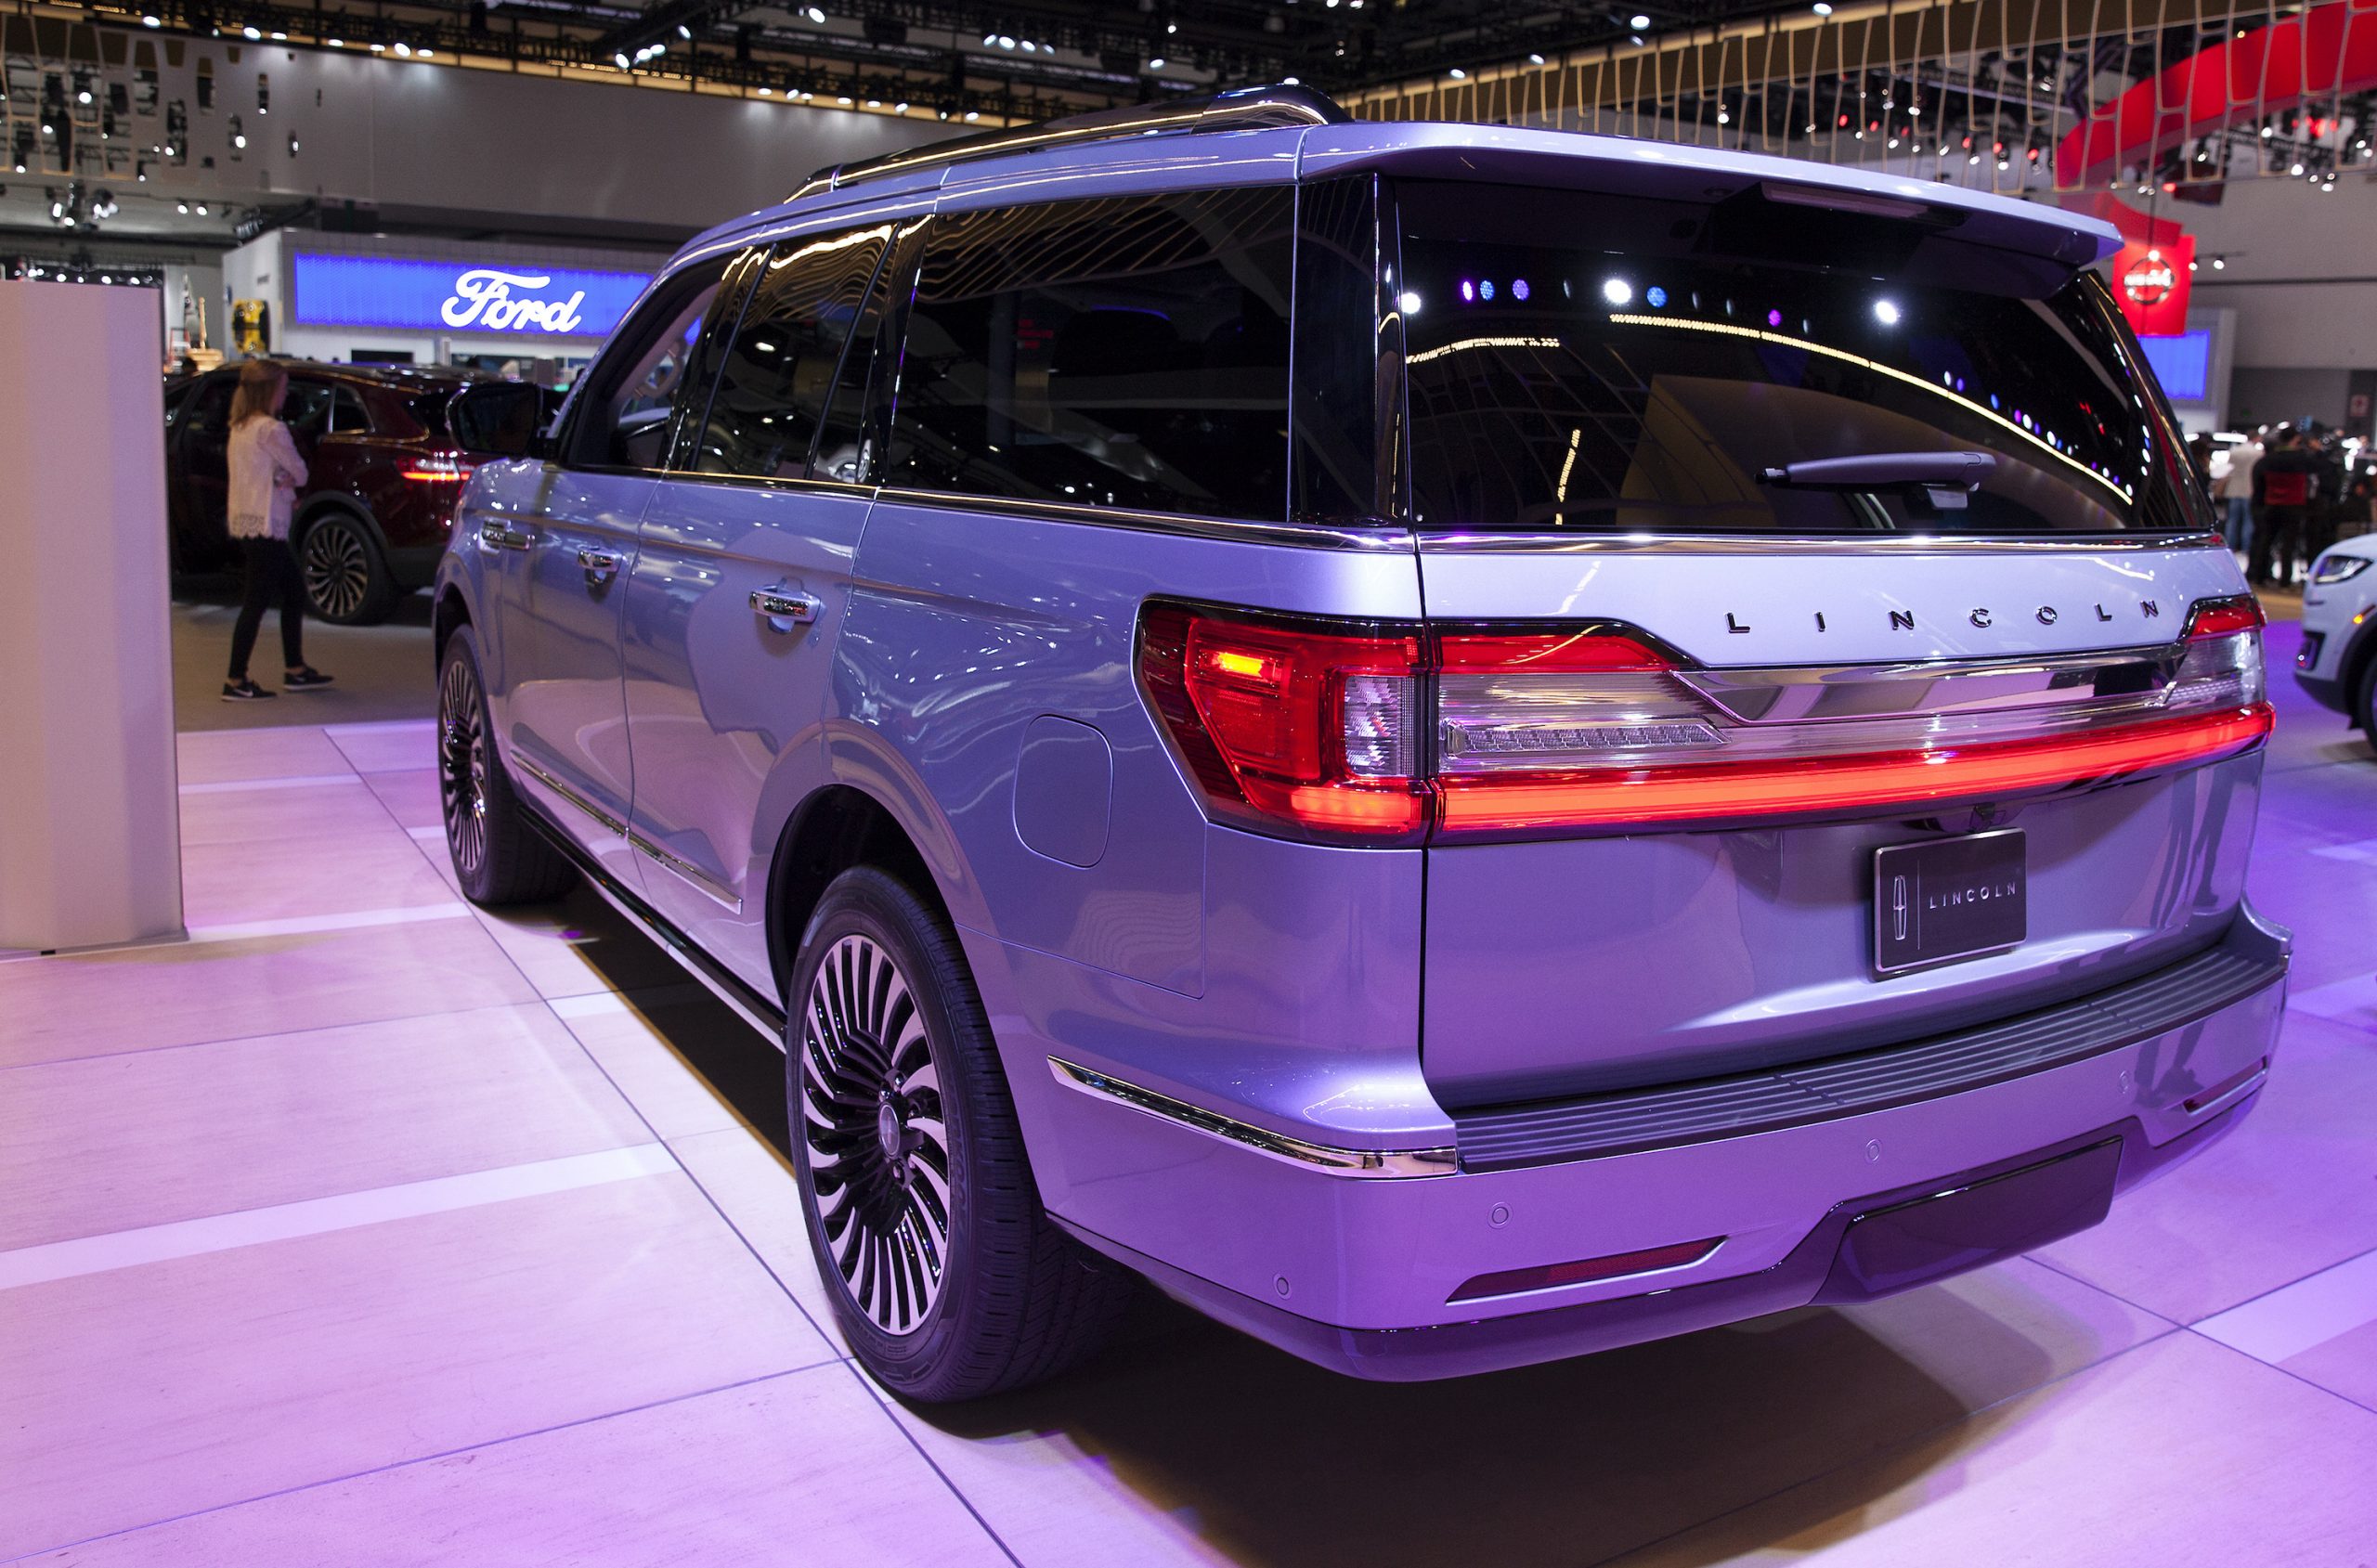 The Ford Motor Co. Lincoln Navigator Black Label sport utility vehicle (SUV) is displayed during AutoMobility LA ahead of the Los Angeles Auto Show